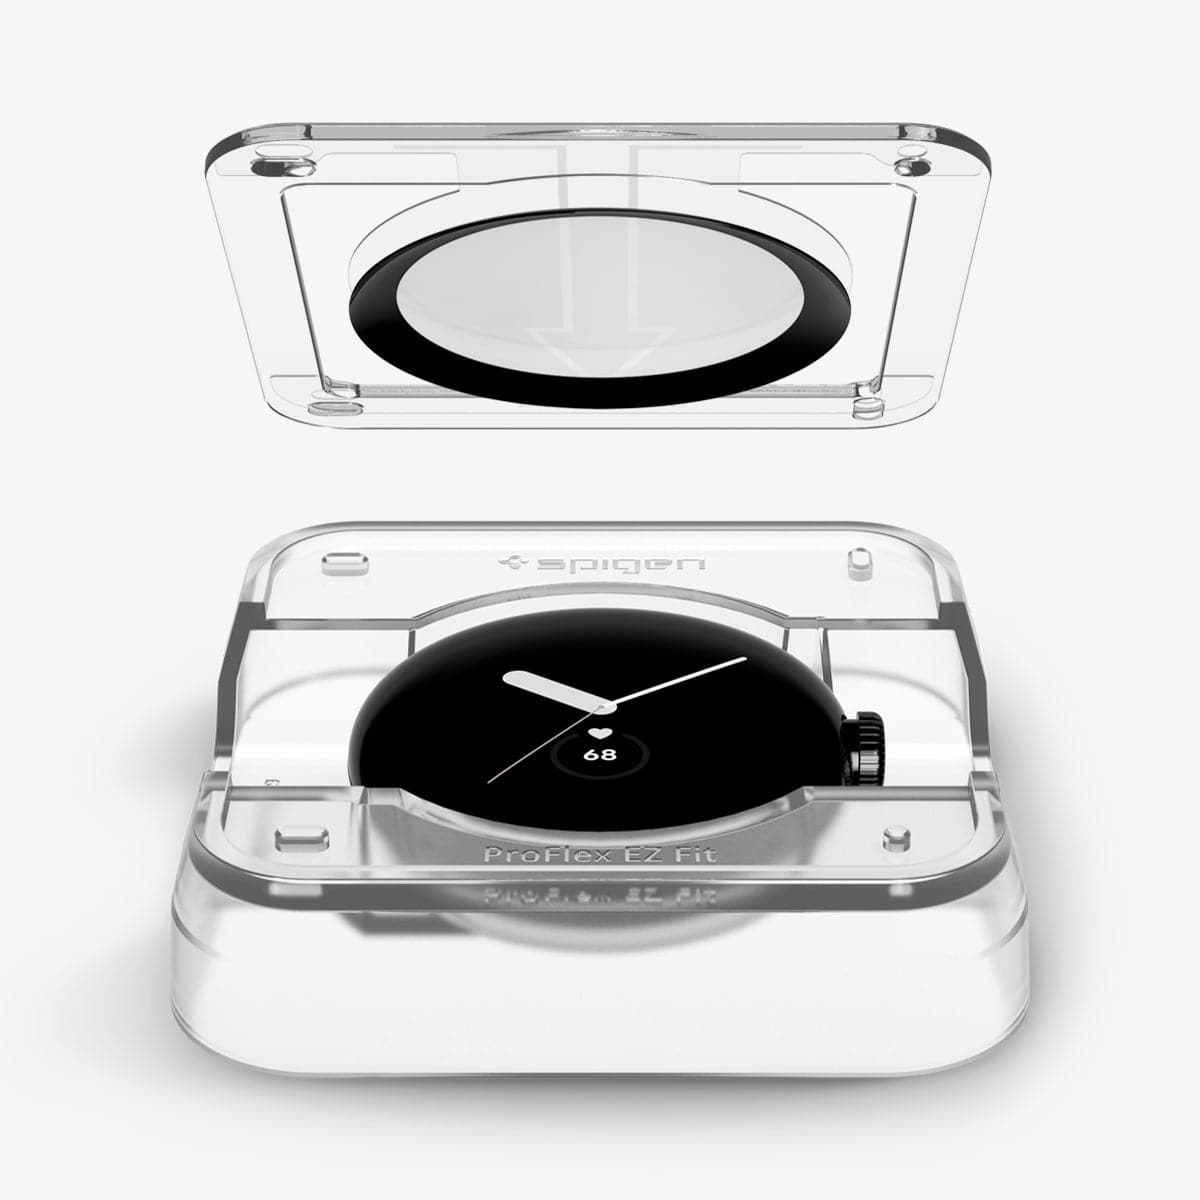 AFL05926 - Pixel Watch Screen Protector ProFlex EZ Fit showing the watch face installed in ez fit tray and screen protector hovering above